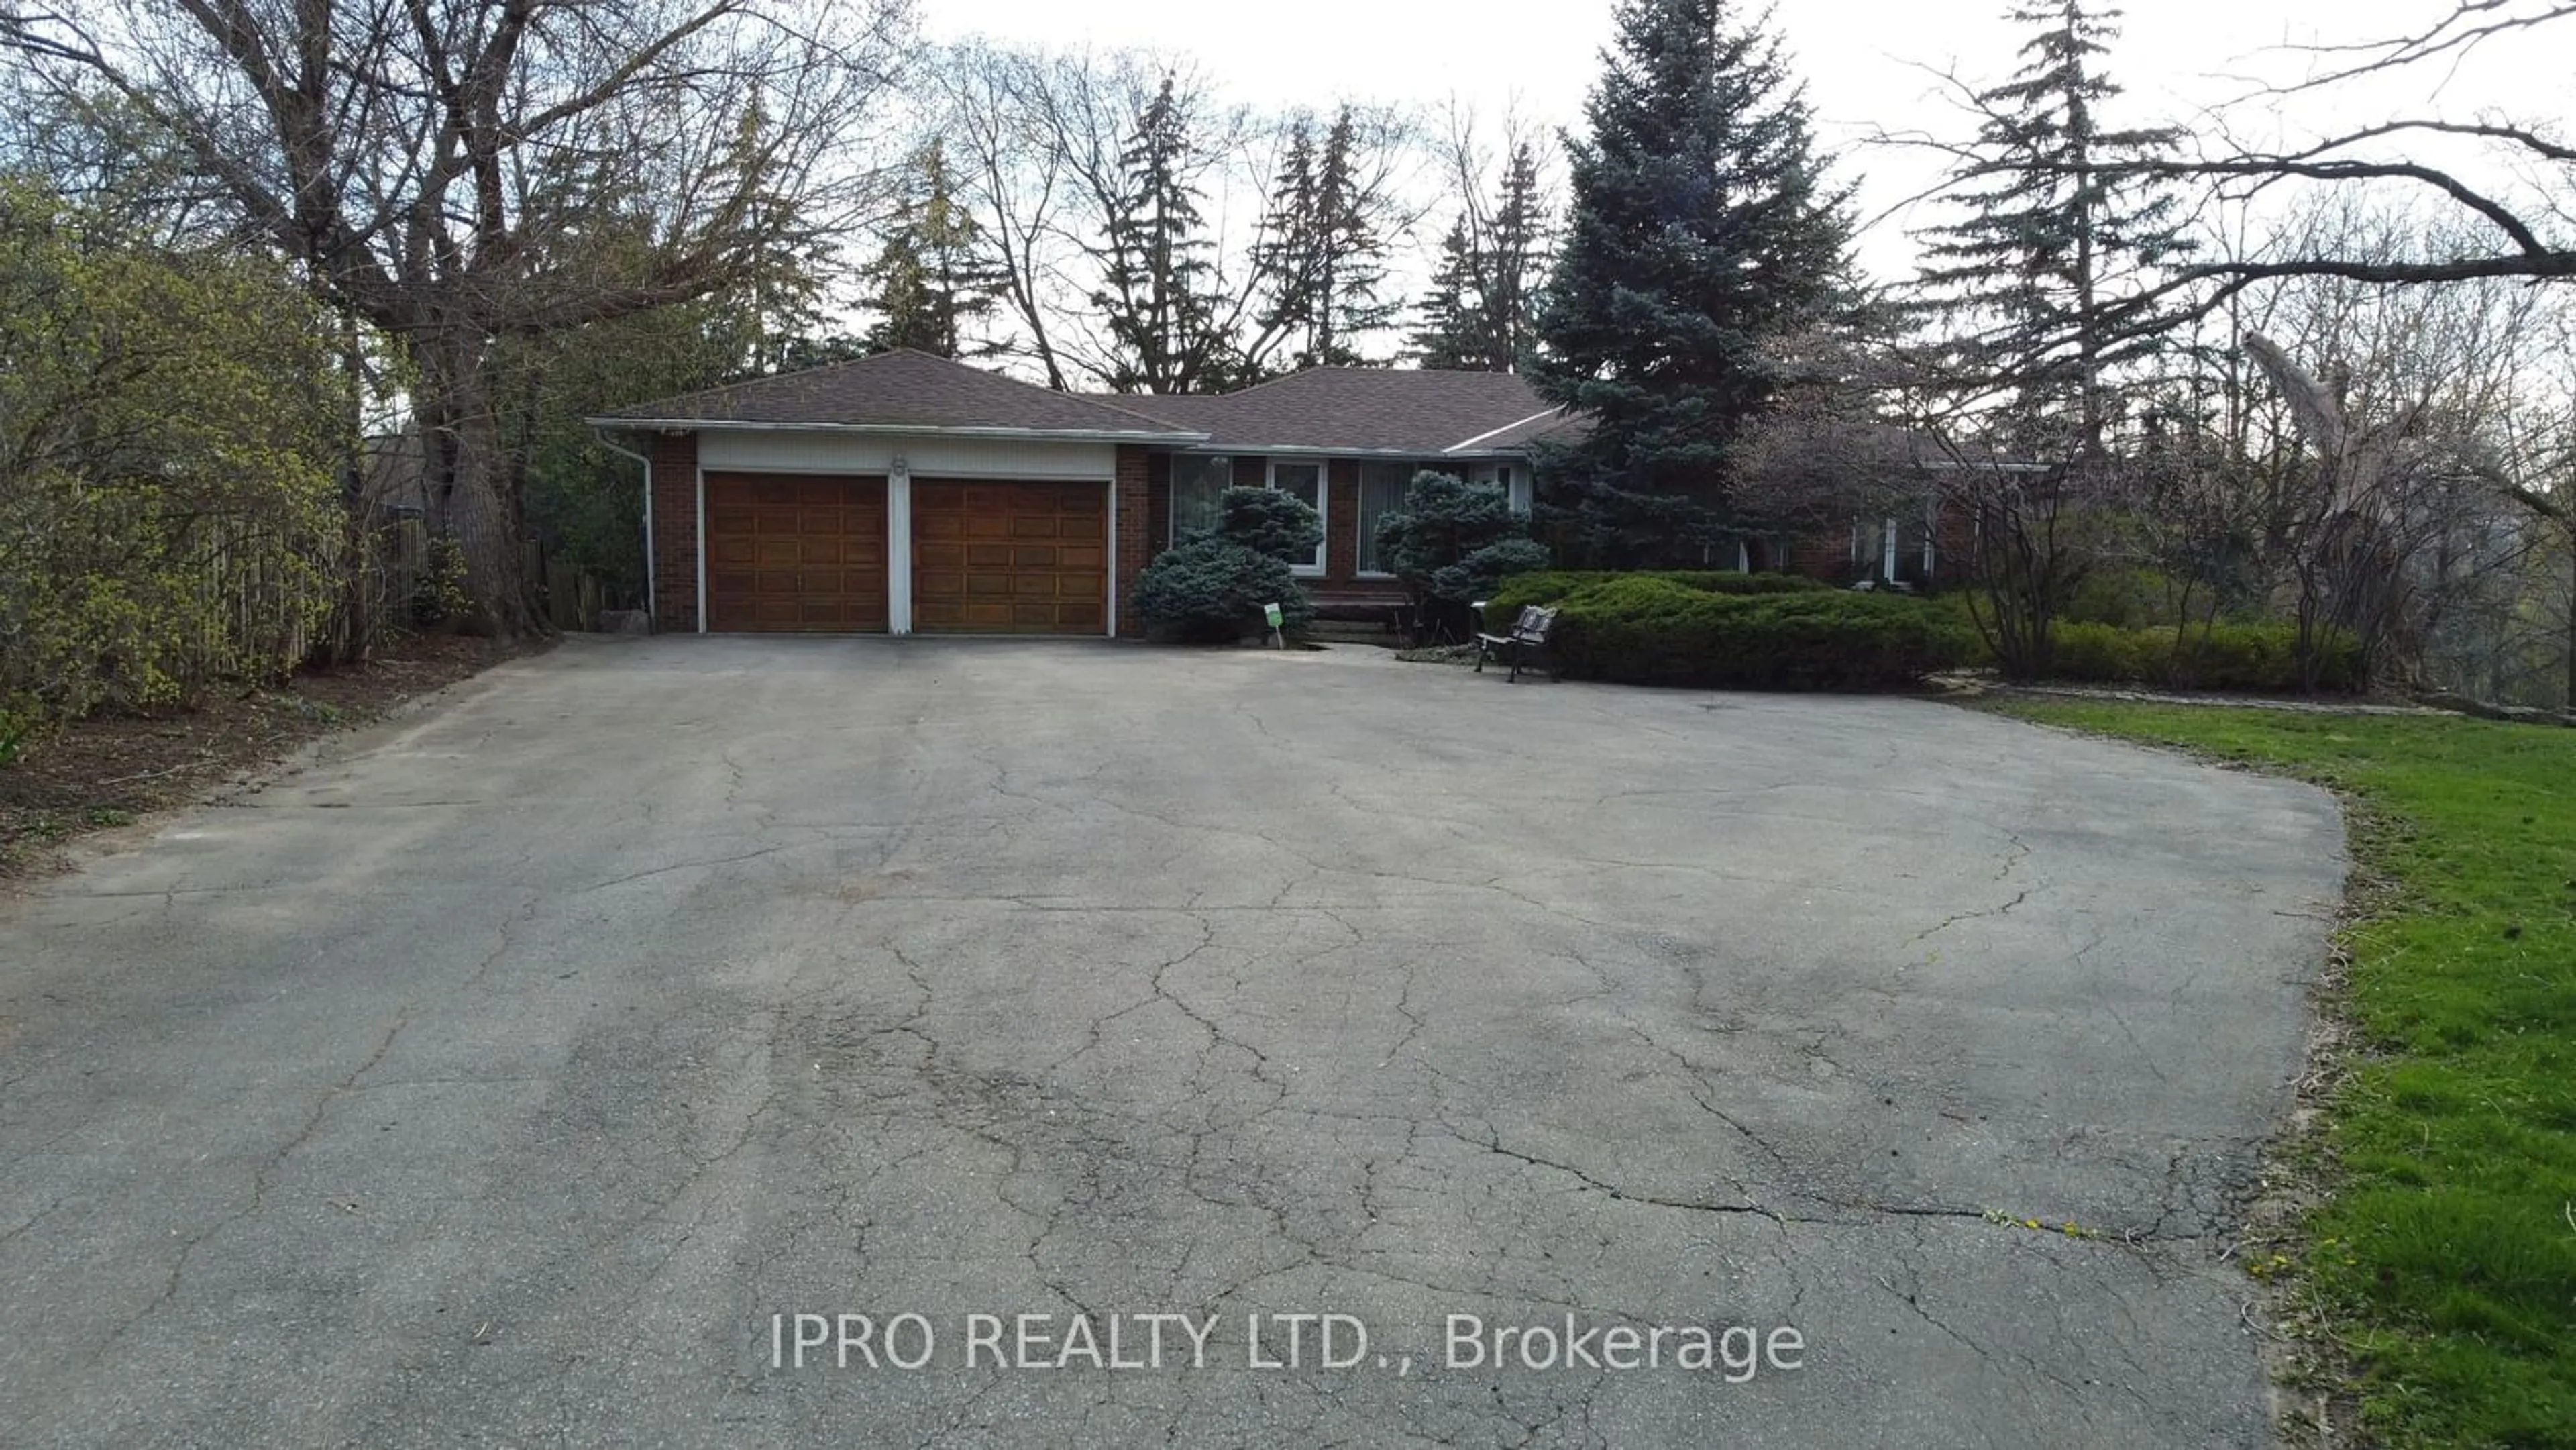 Frontside or backside of a home for 72 Rutledge Rd, Mississauga Ontario L5M 1H4